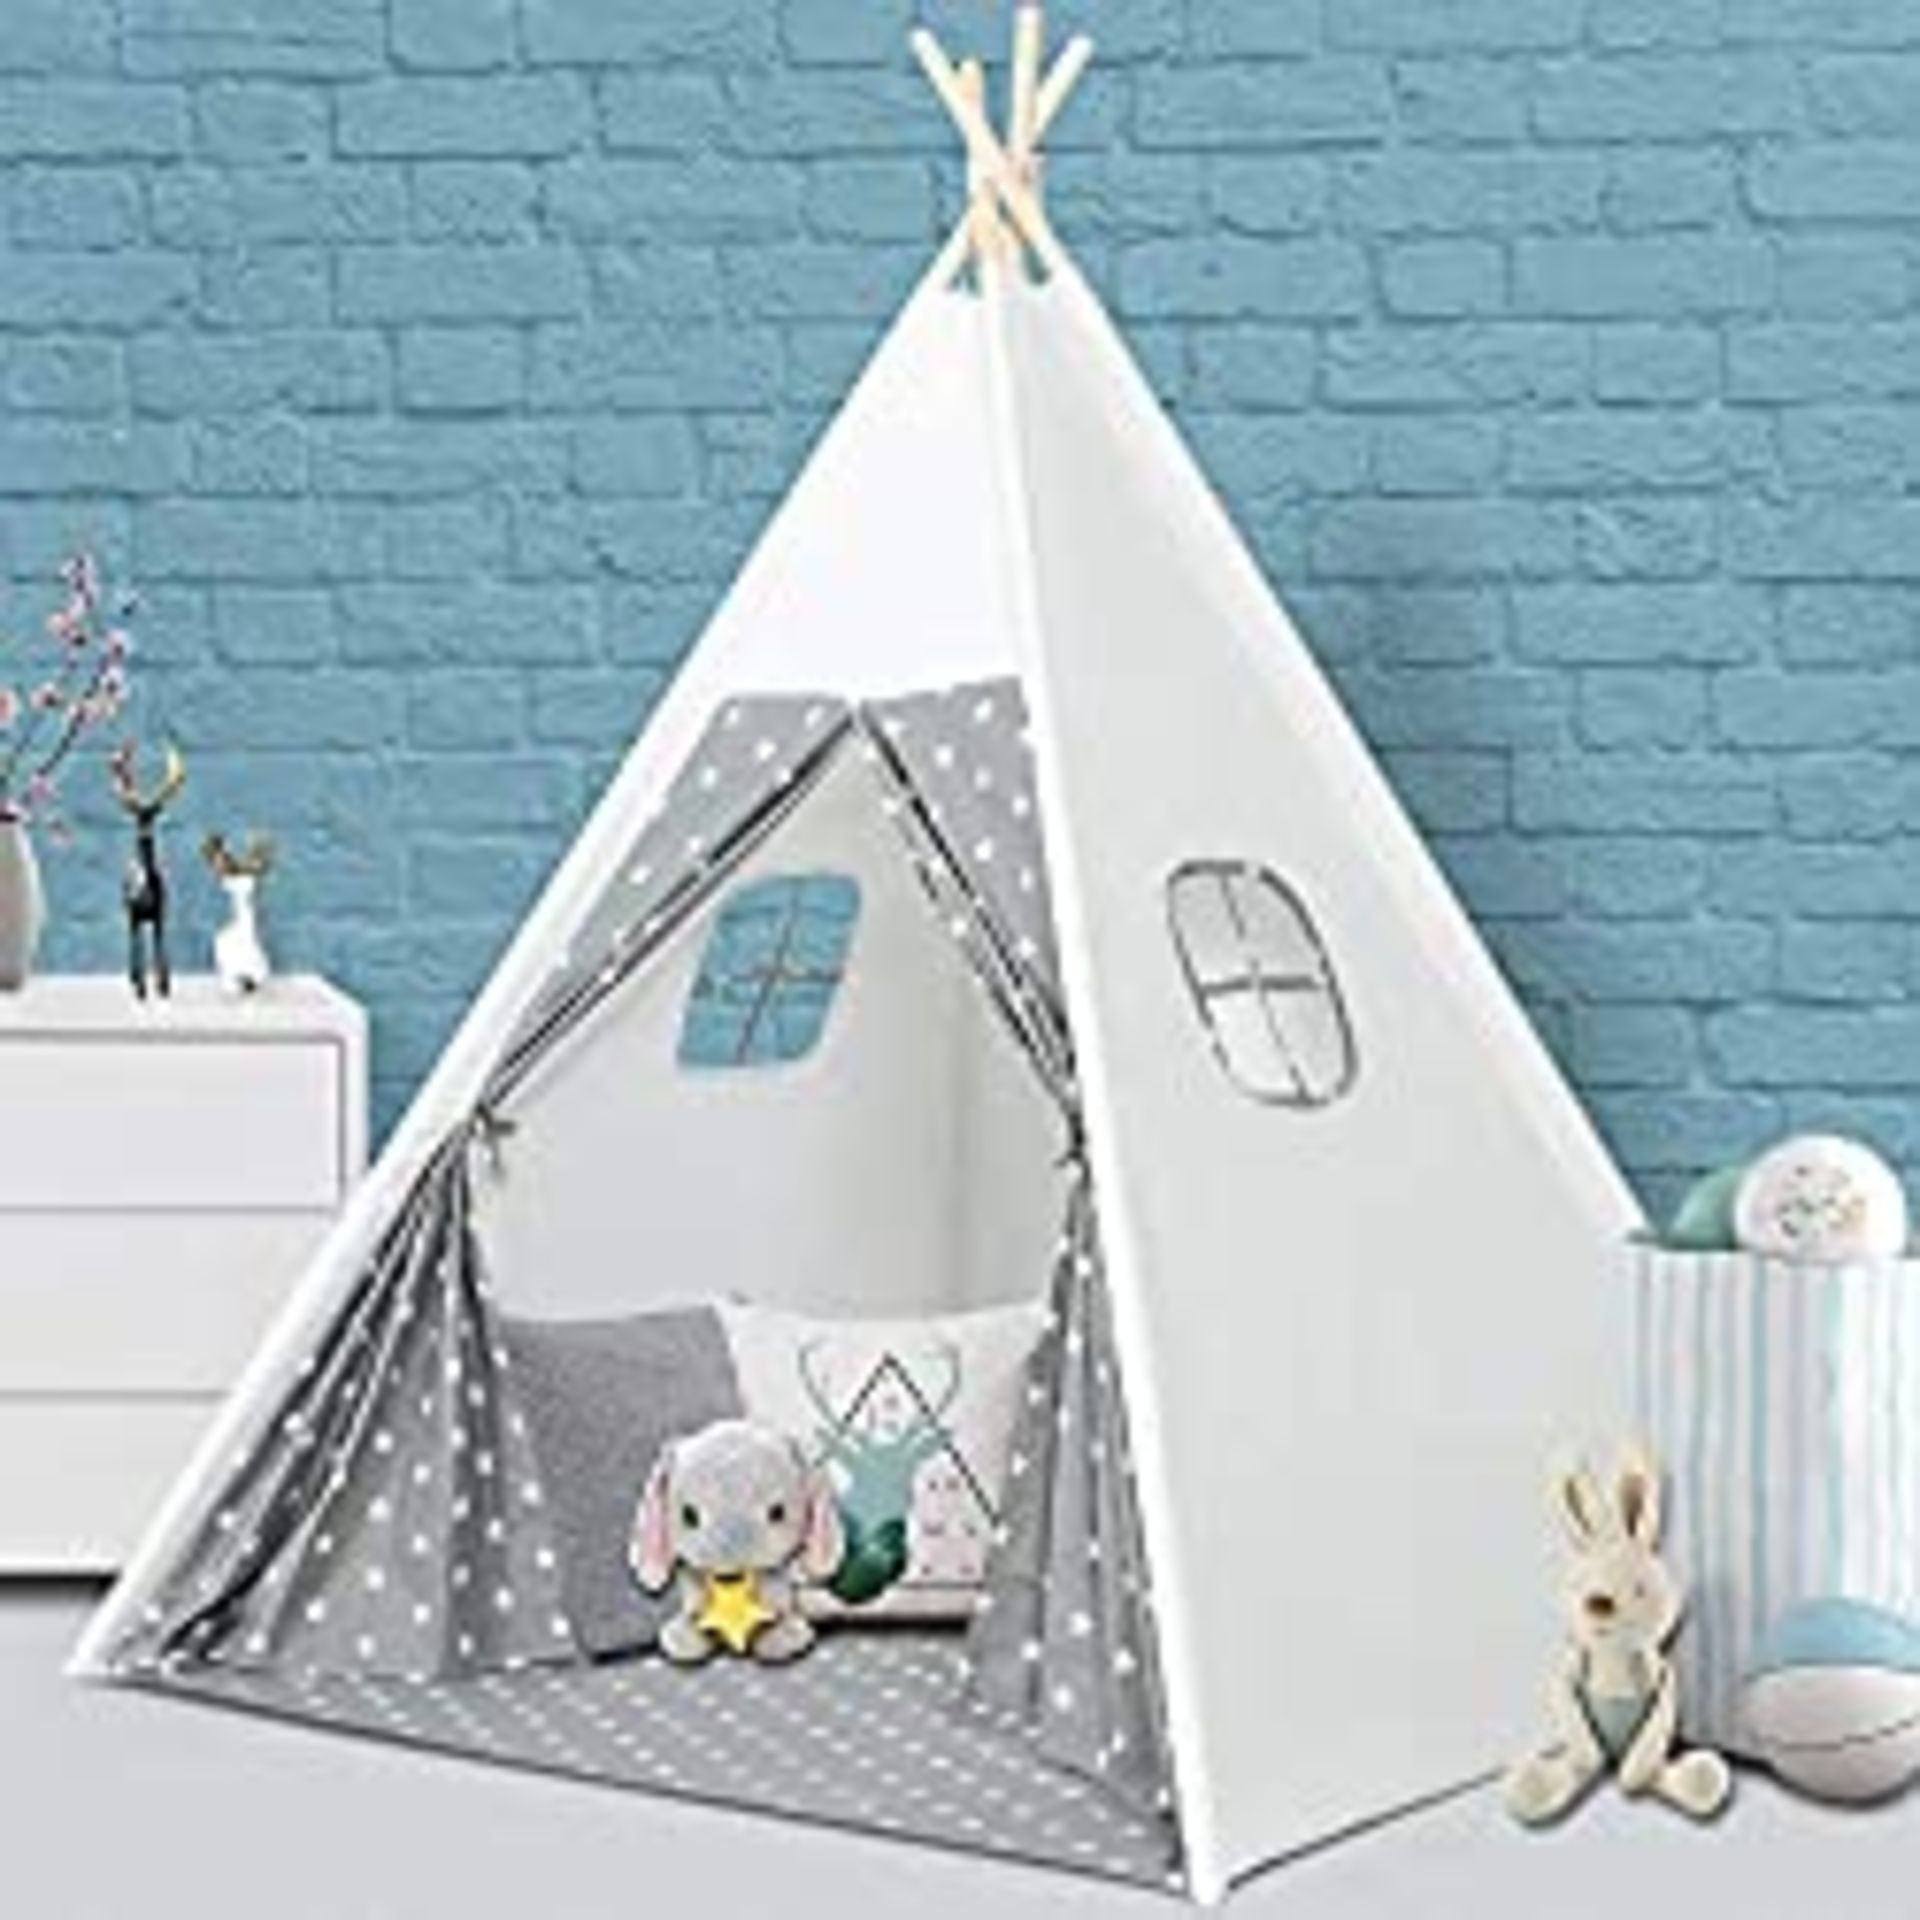 RRP £43.99 Wilwolfer Teepee Tent for Kids Foldable Children Play